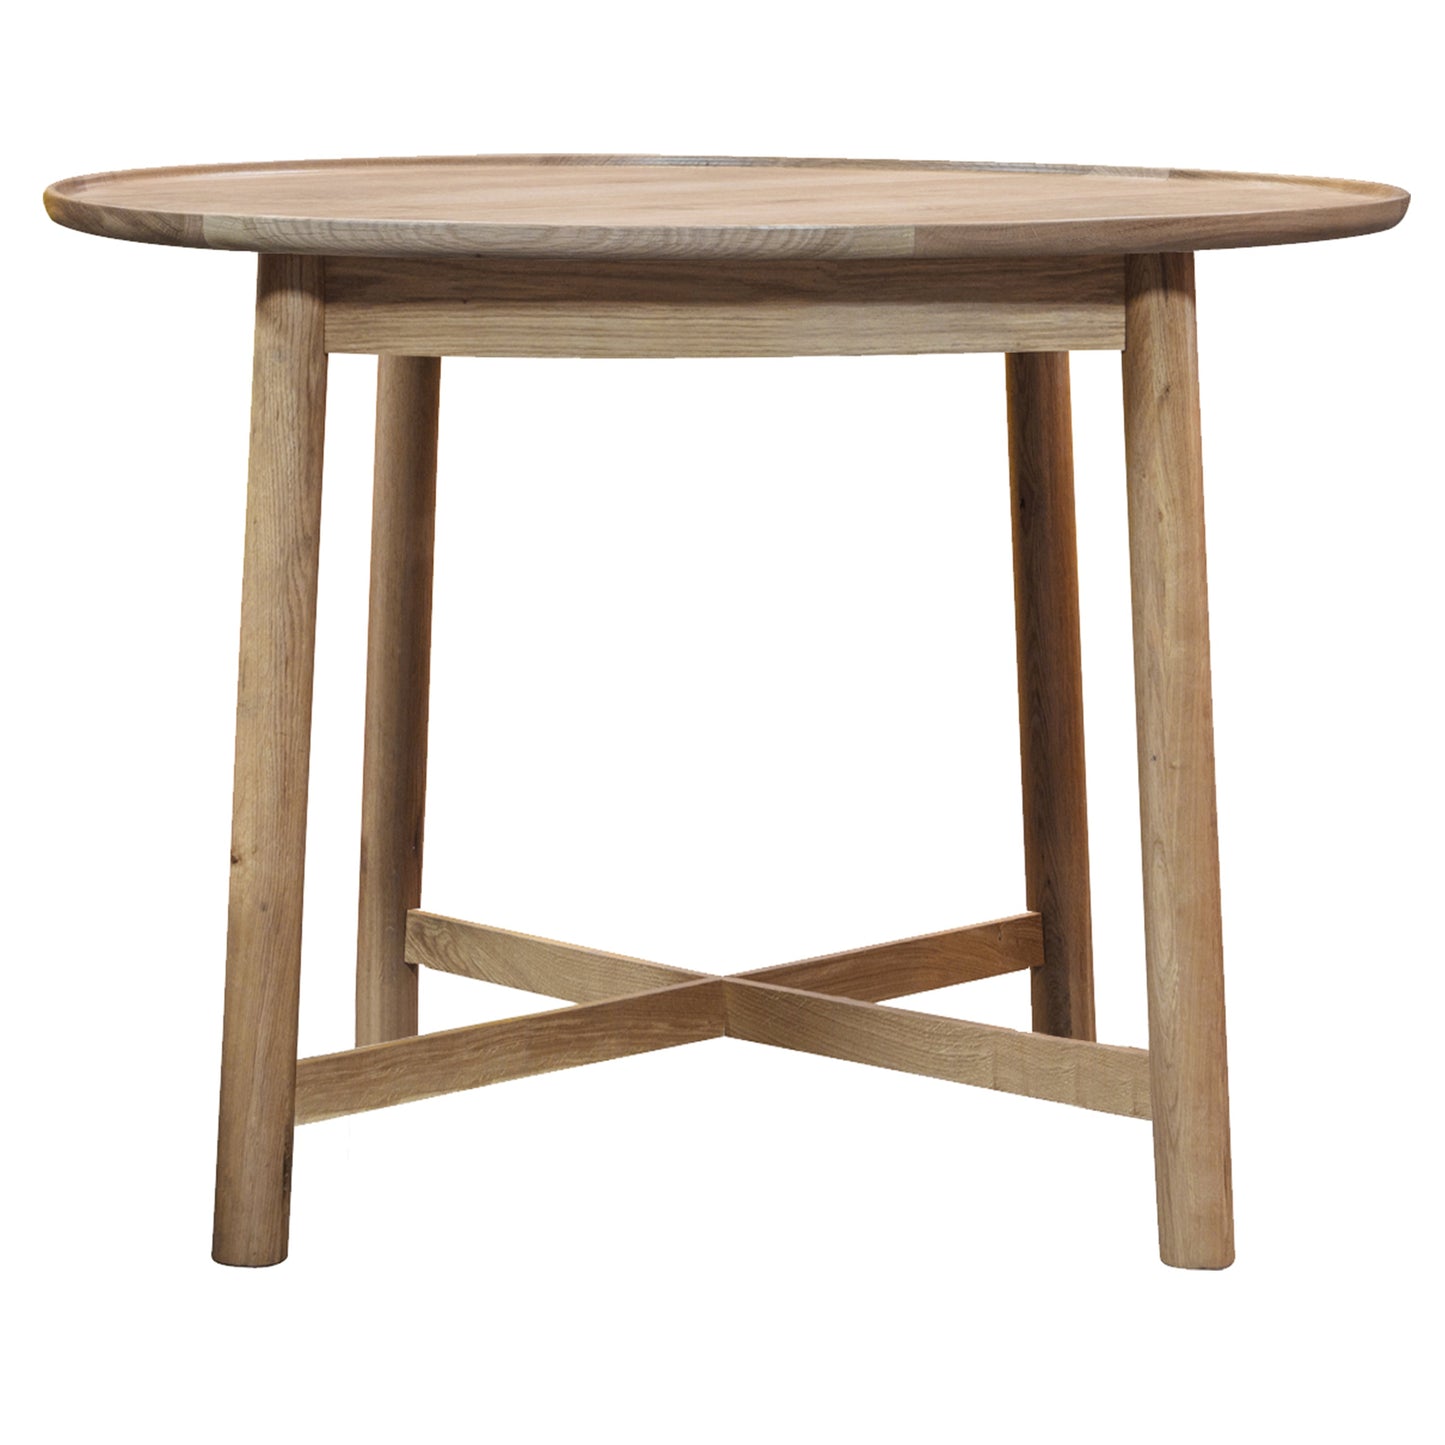 Kingham Round Dining Table 900x900x750mm